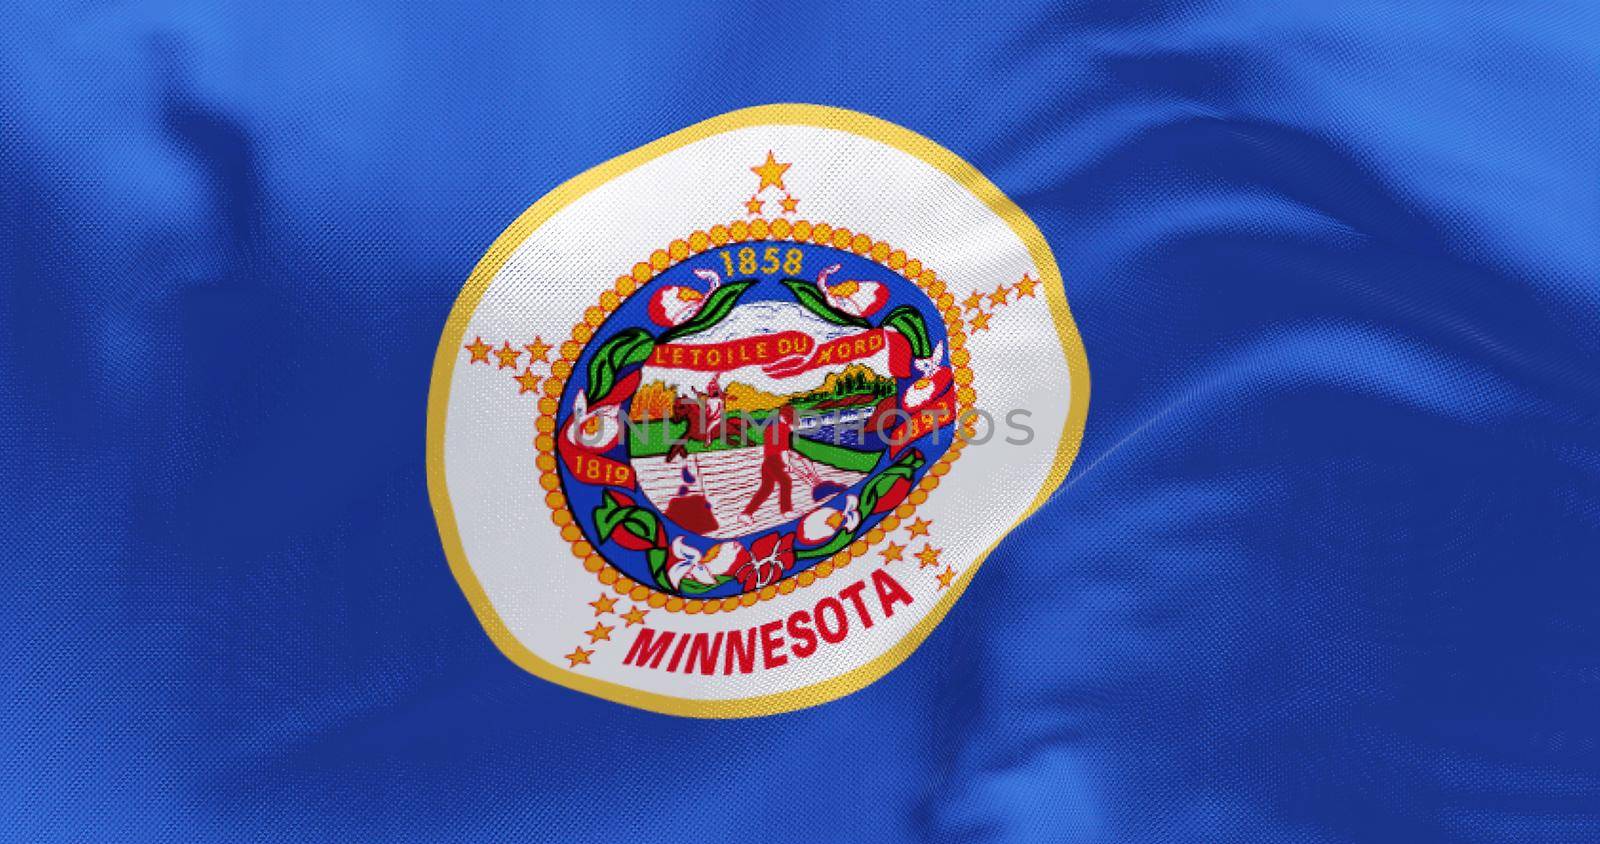 The US state flag of Minnesota waving in the wind. Minnesota is a state in the upper midwestern region of the United States. Democracy and independence. Fabric textured background